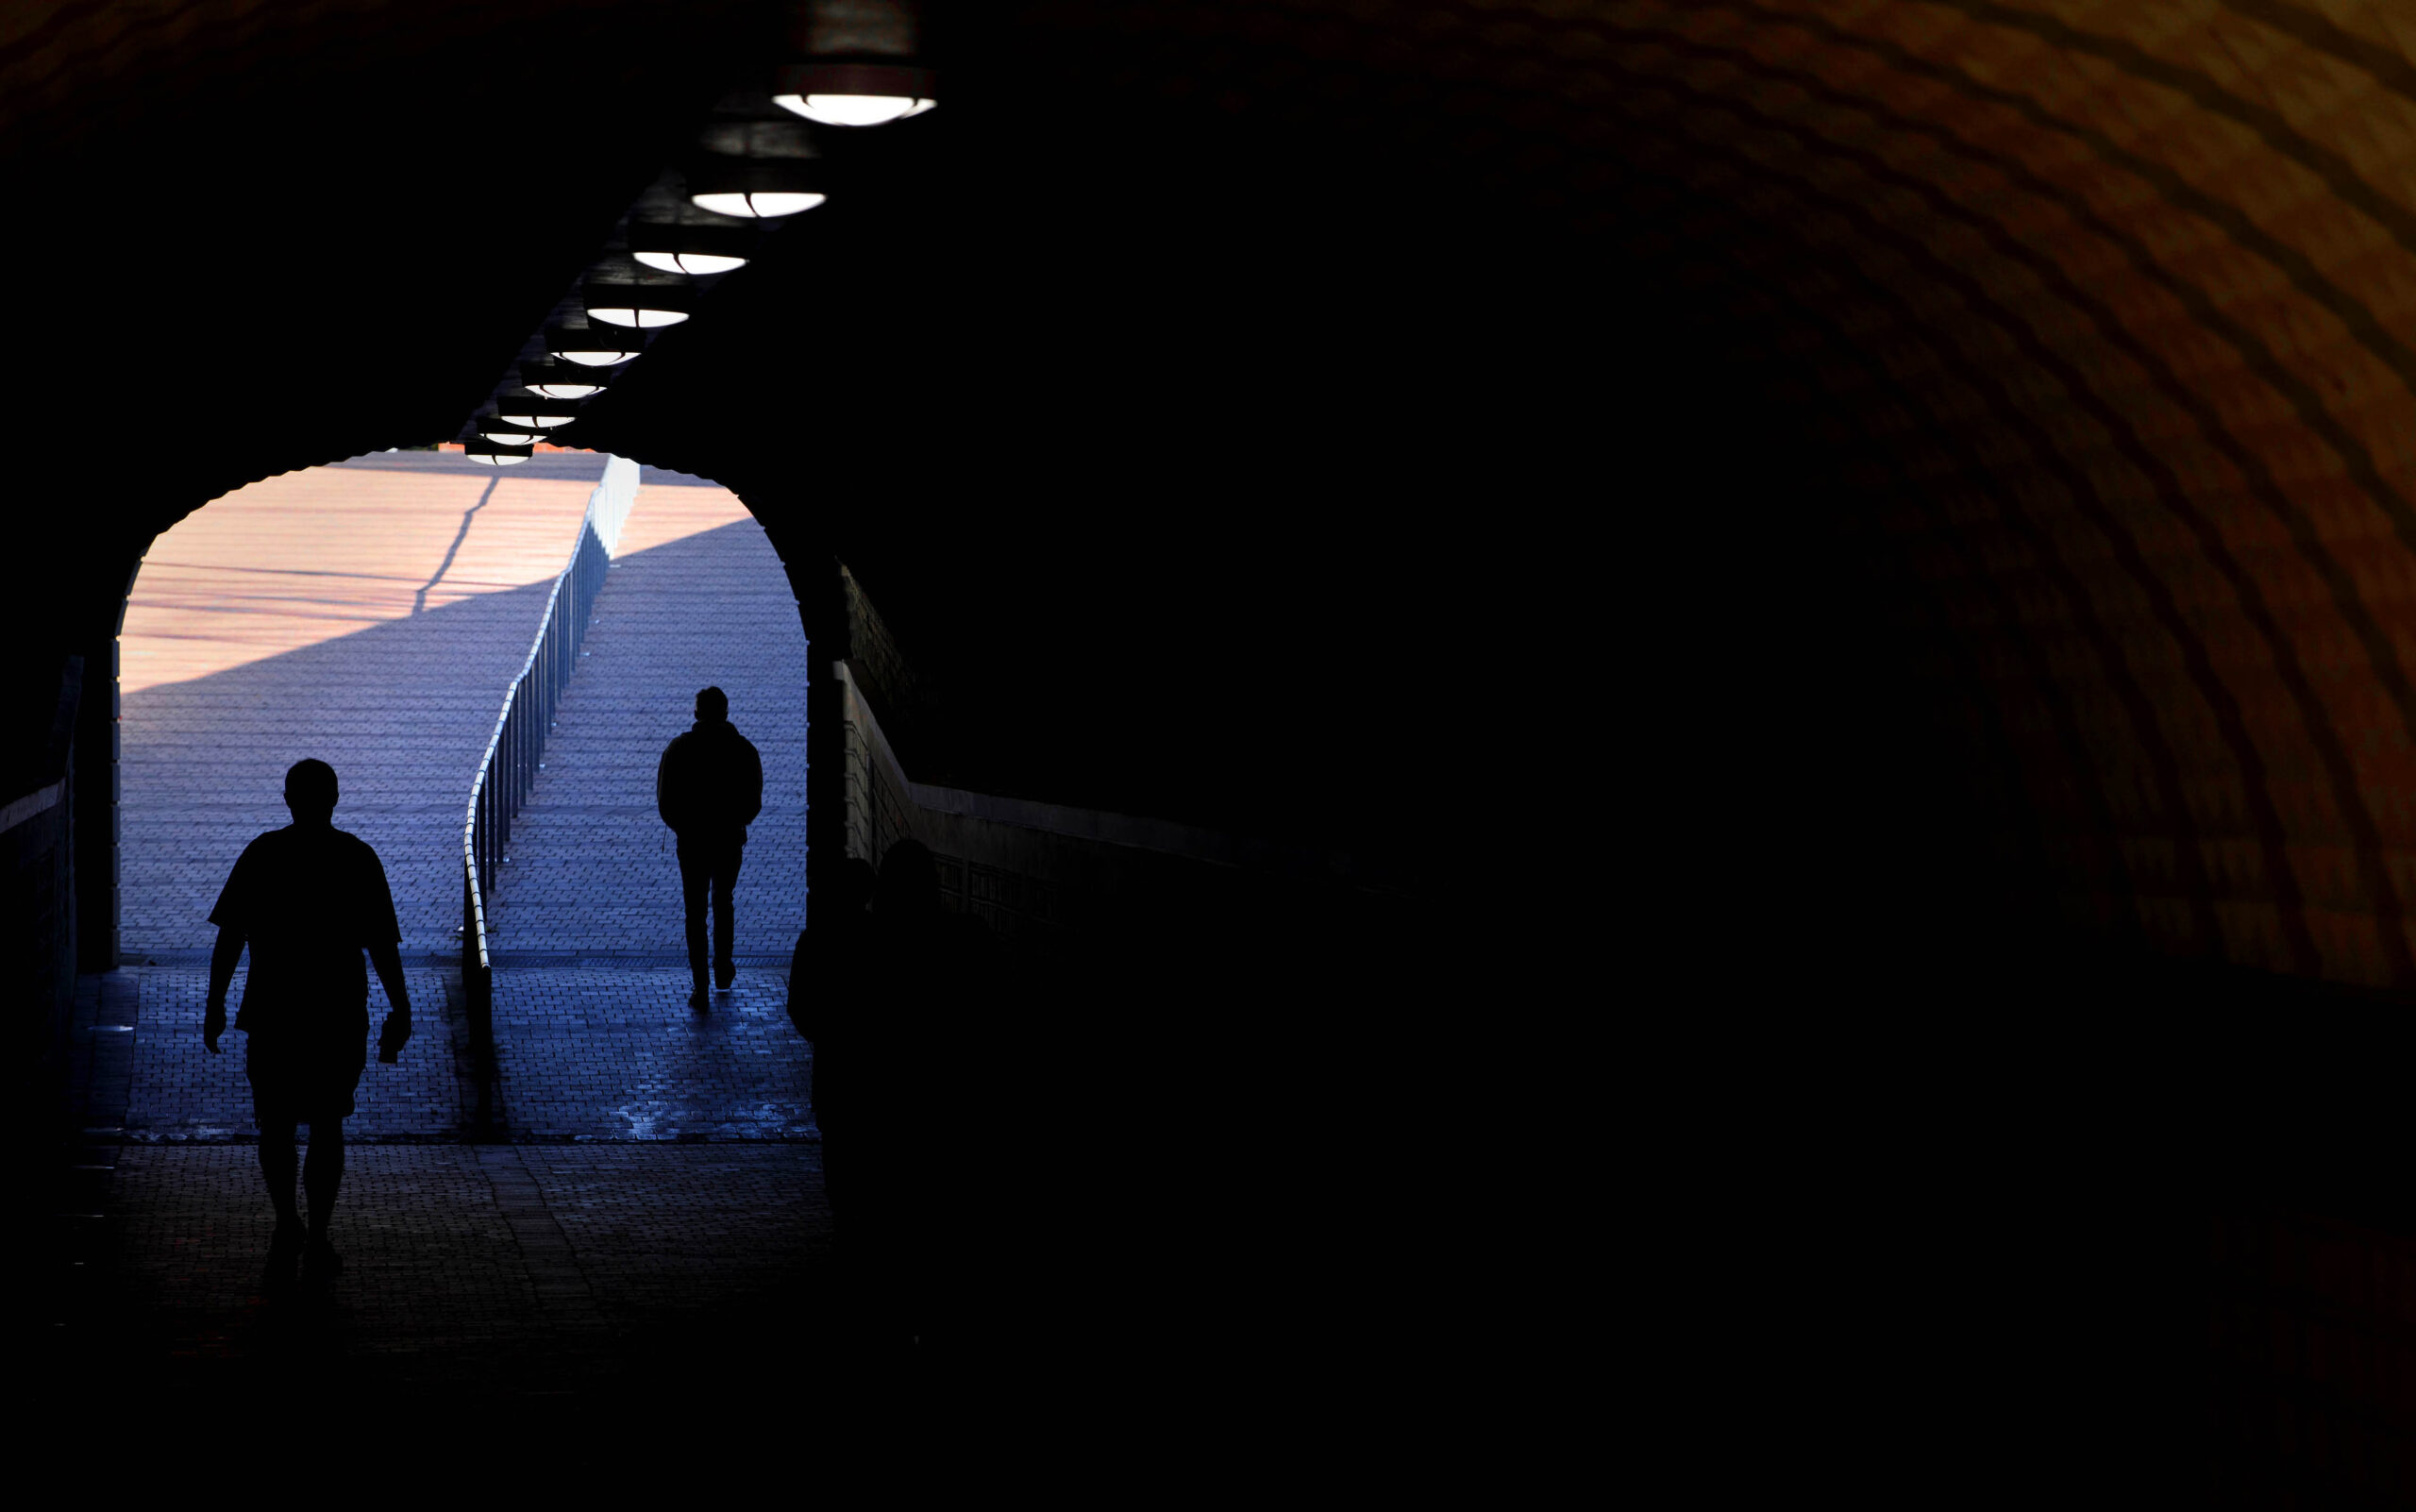 Silhouettes of students at the bright end of a dark underpass.